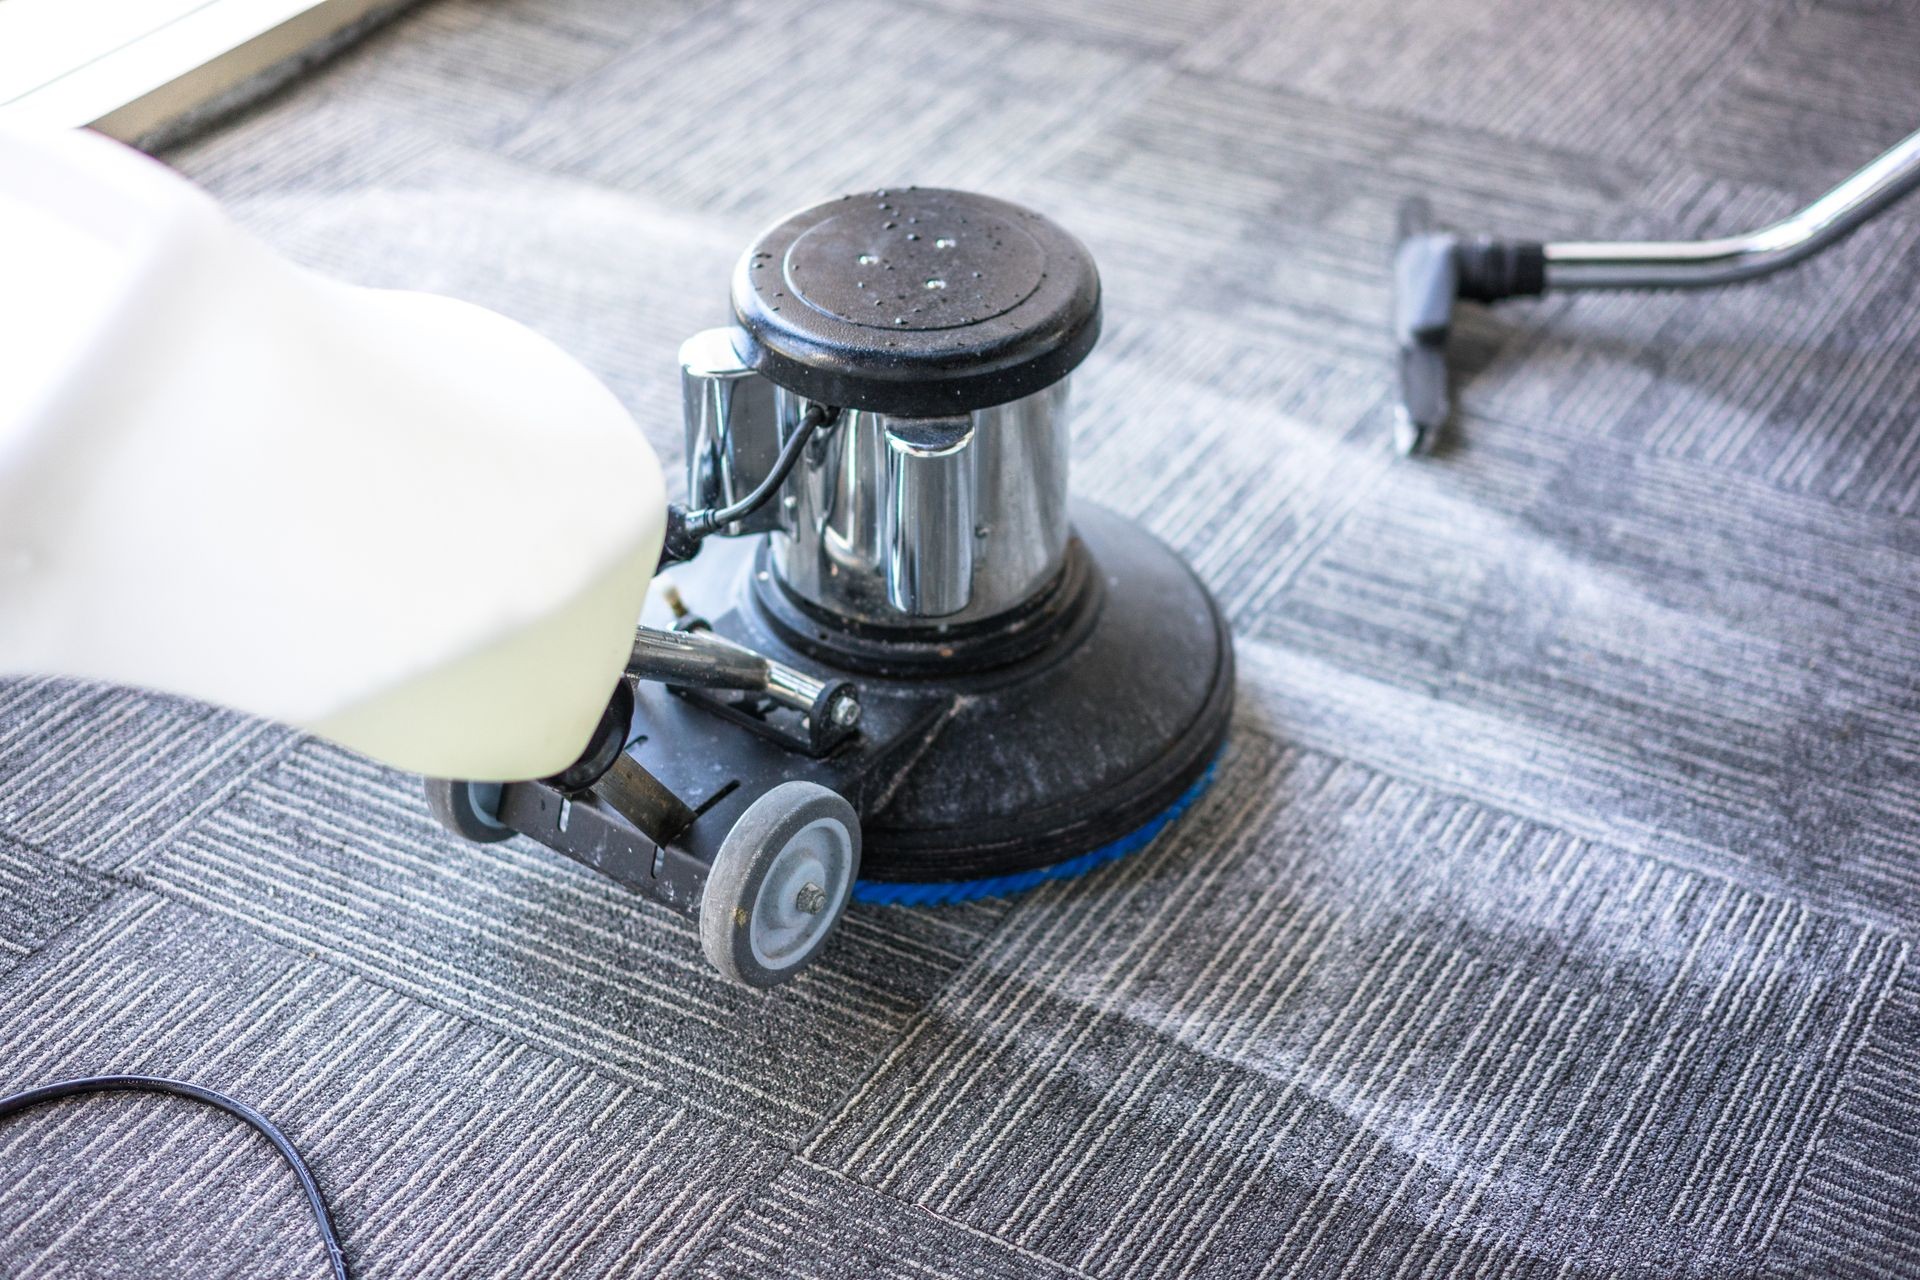 Floor care and cleaning services with washing machine, carpet cleaning, upholstery cleaning, professional cleaning, washer scrubber machine cleaning